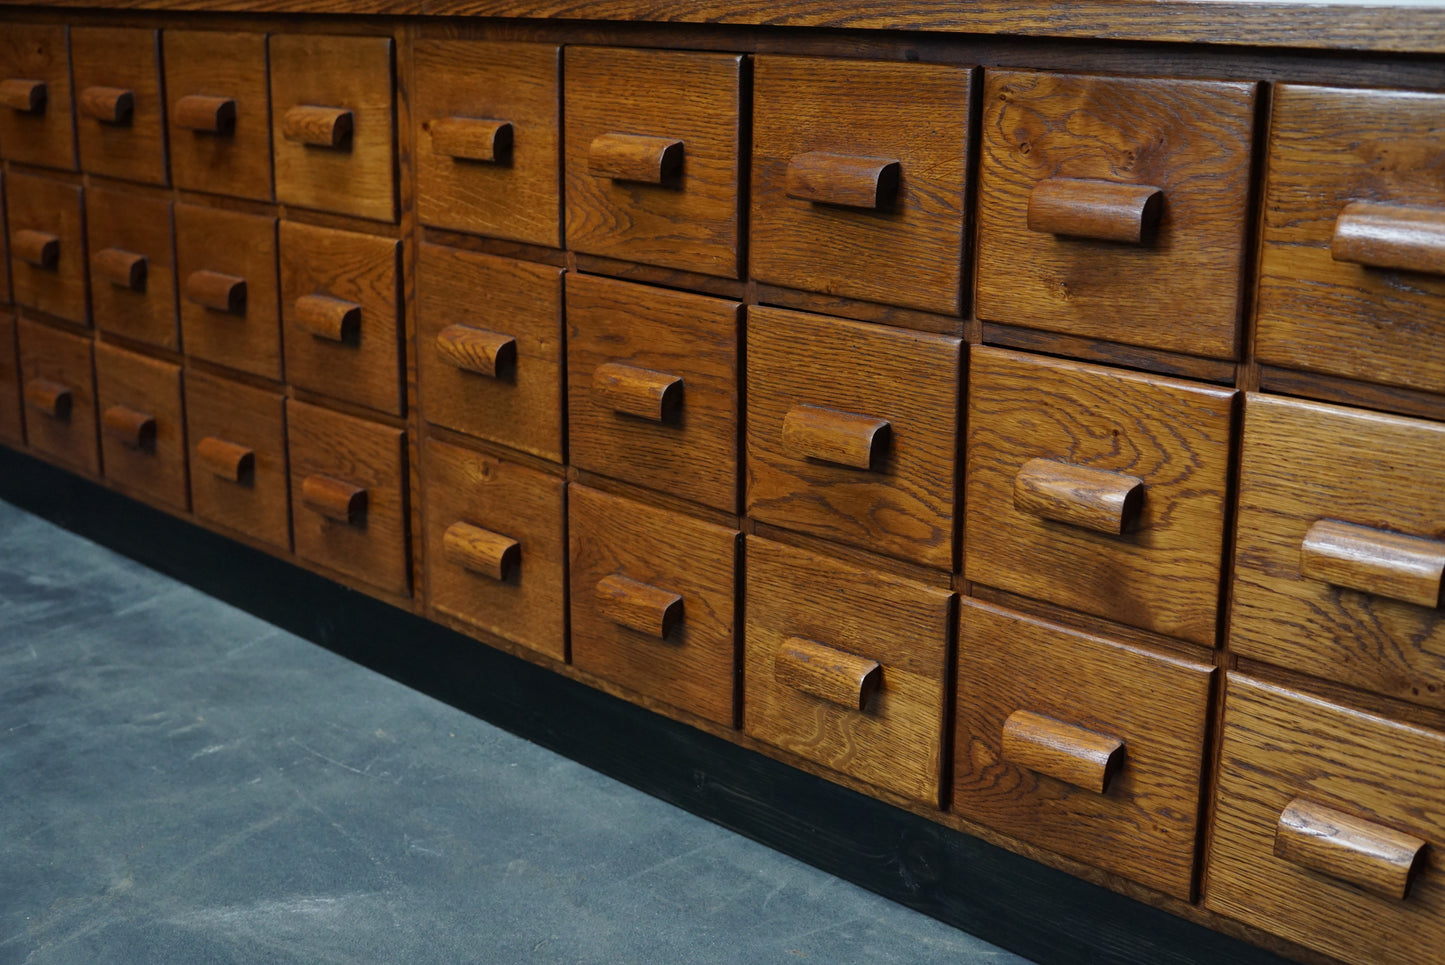 Oak German Industrial Apothecary Cabinet / Lowboard, Mid-20th Century